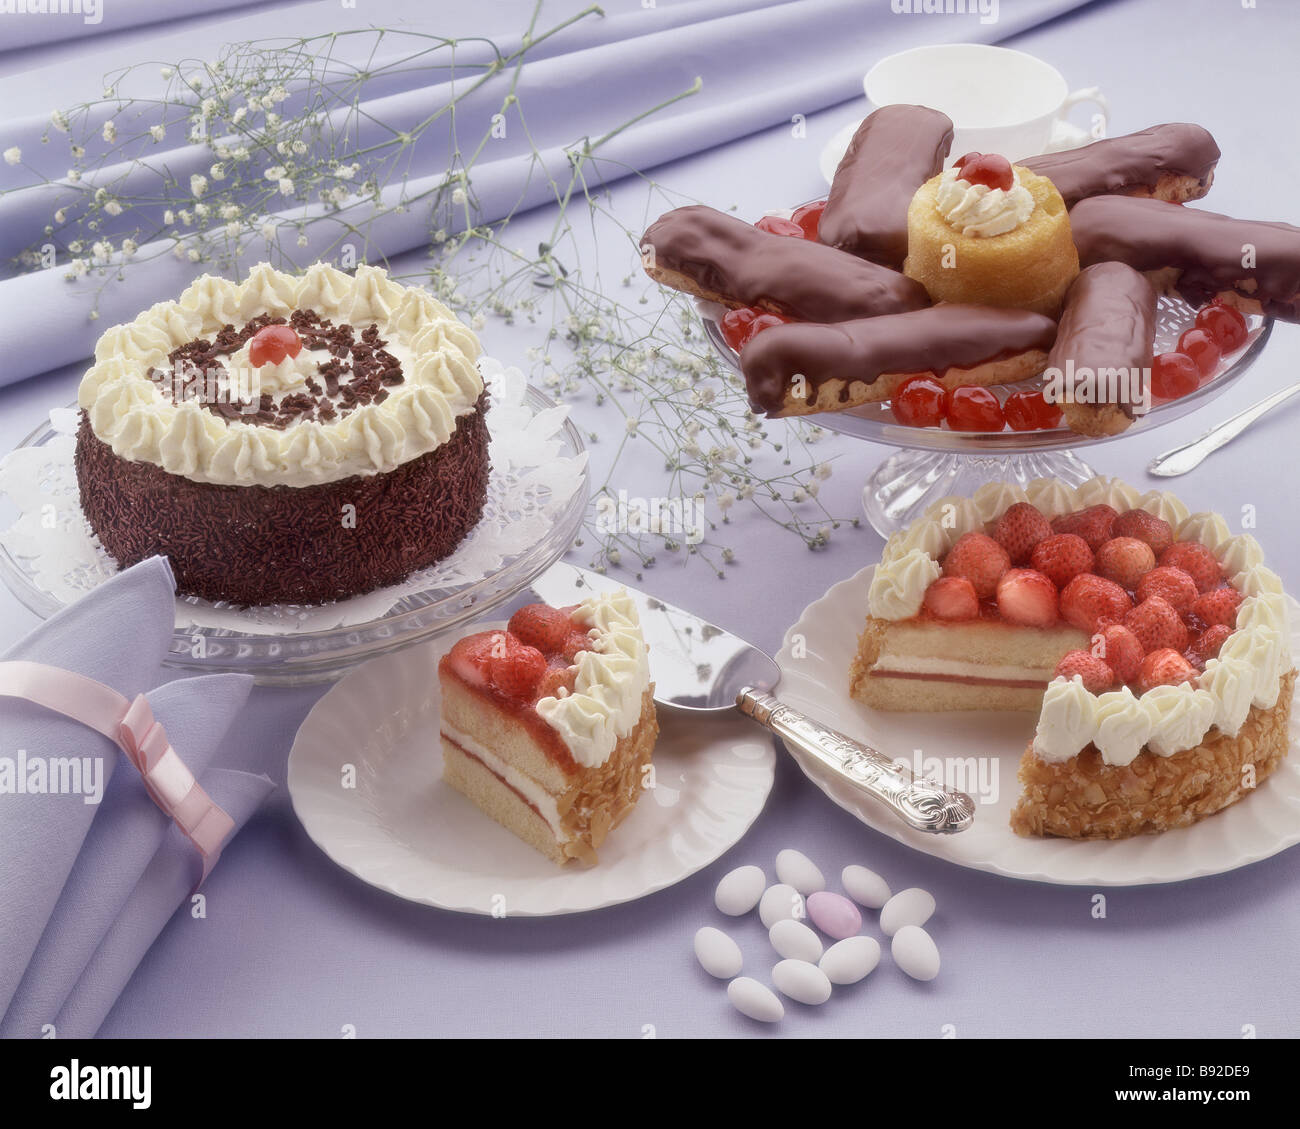 Gateaux, Cakes and Chocolate Eclairs Stock Photo